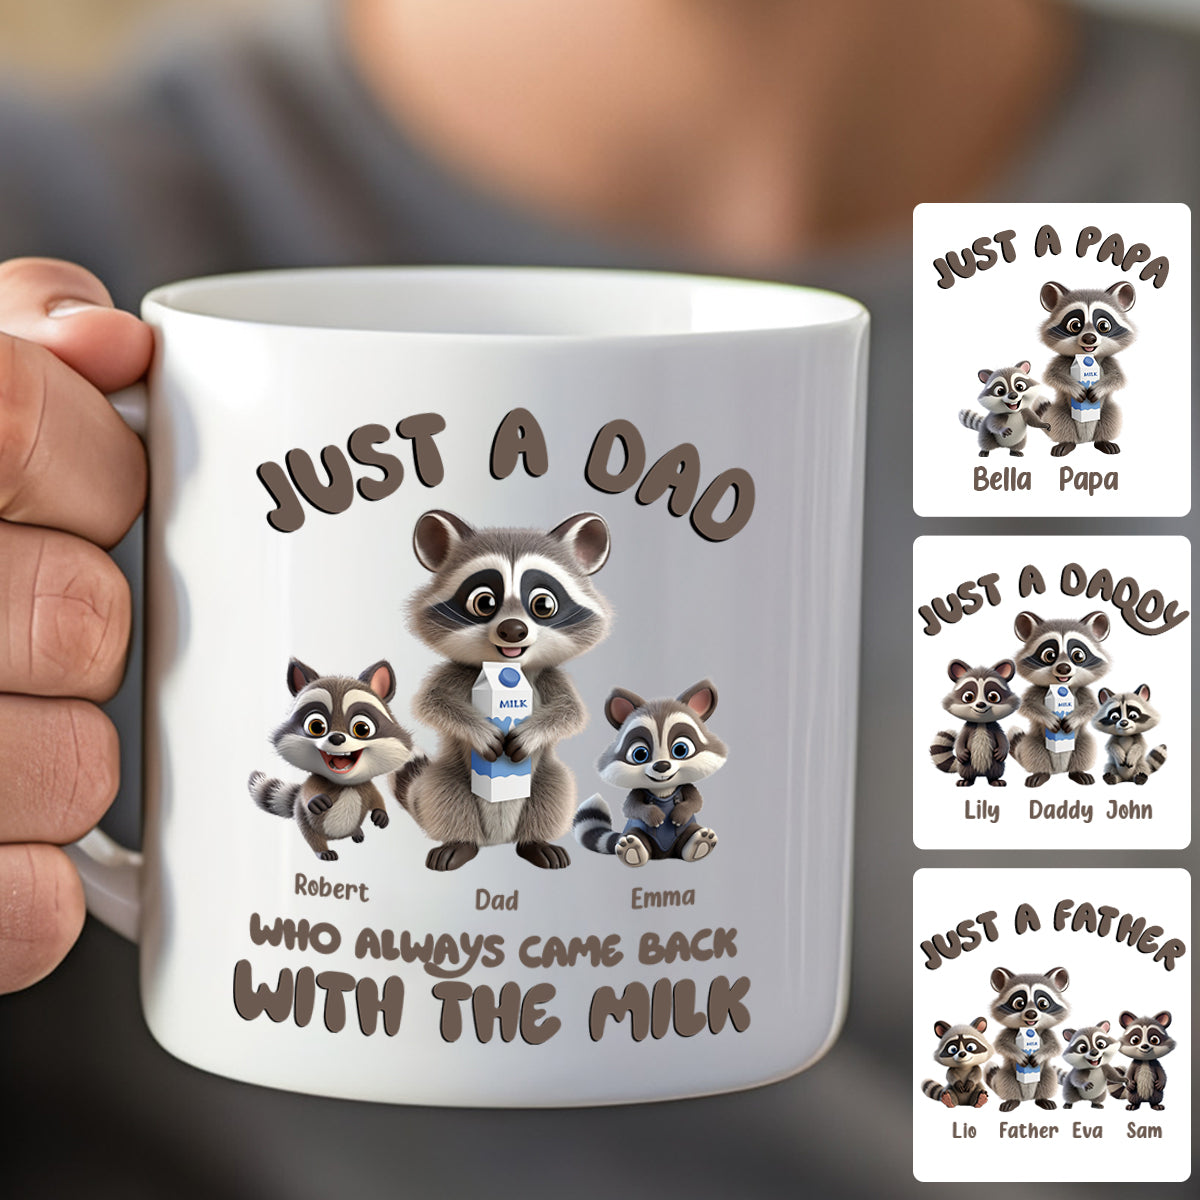 Discover Just A Dad Who Always Came Back With The Milk - Personalized Father Mug